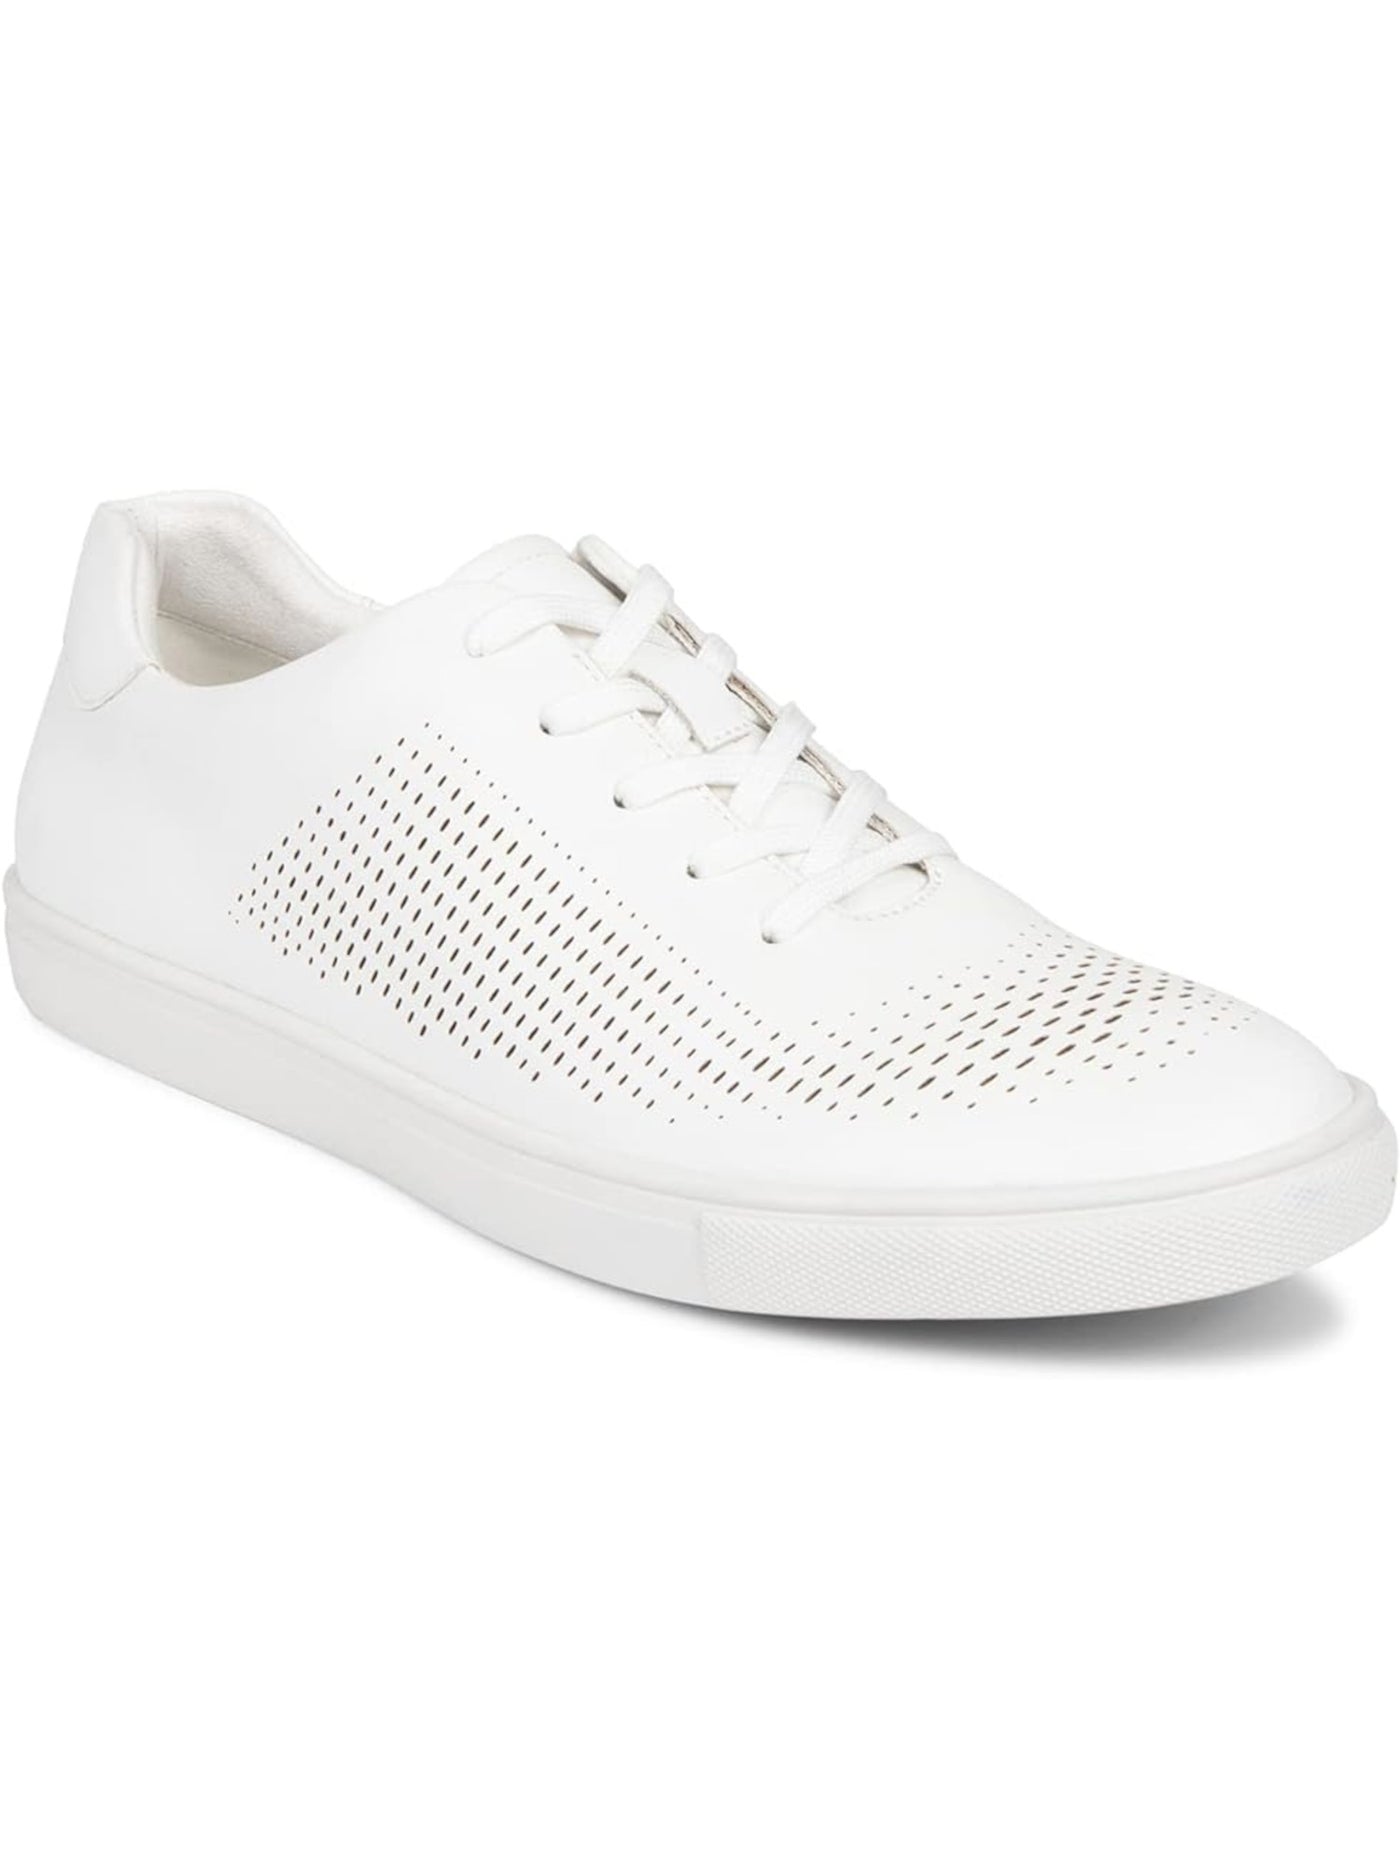 UNLISTED by KENNETH COLE Womens White Perforated Padded Rally Round Toe Lace-Up Sneakers Shoes 11 M